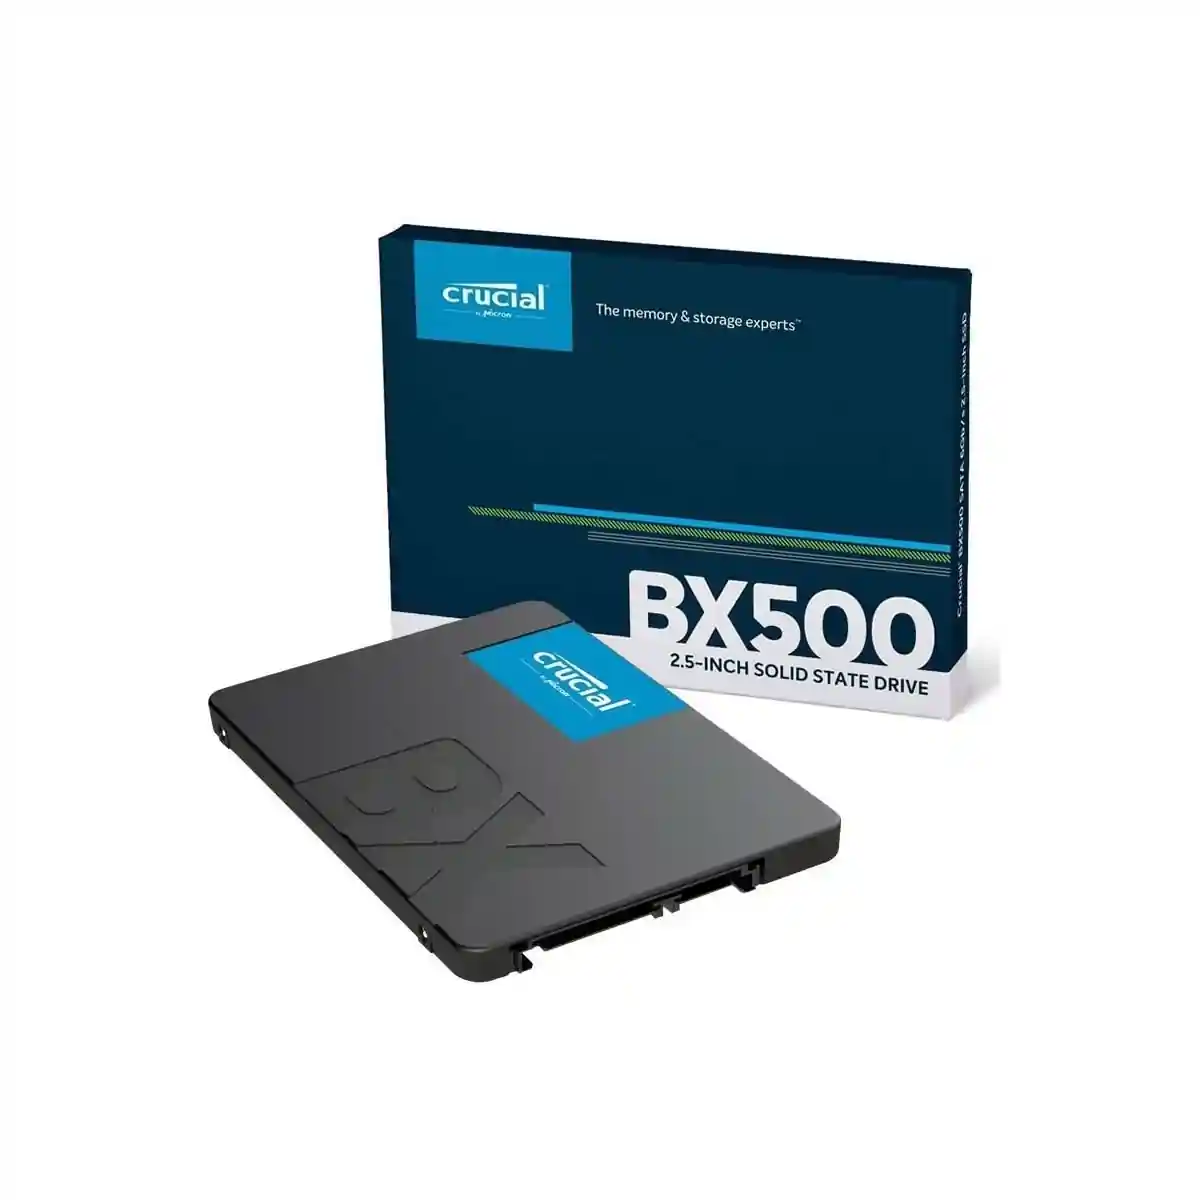 Crucial HARD DISK SSD 2,5" STATO SOLIDO 480GB CRUCIAL BX500 CT480BX500SSD1 